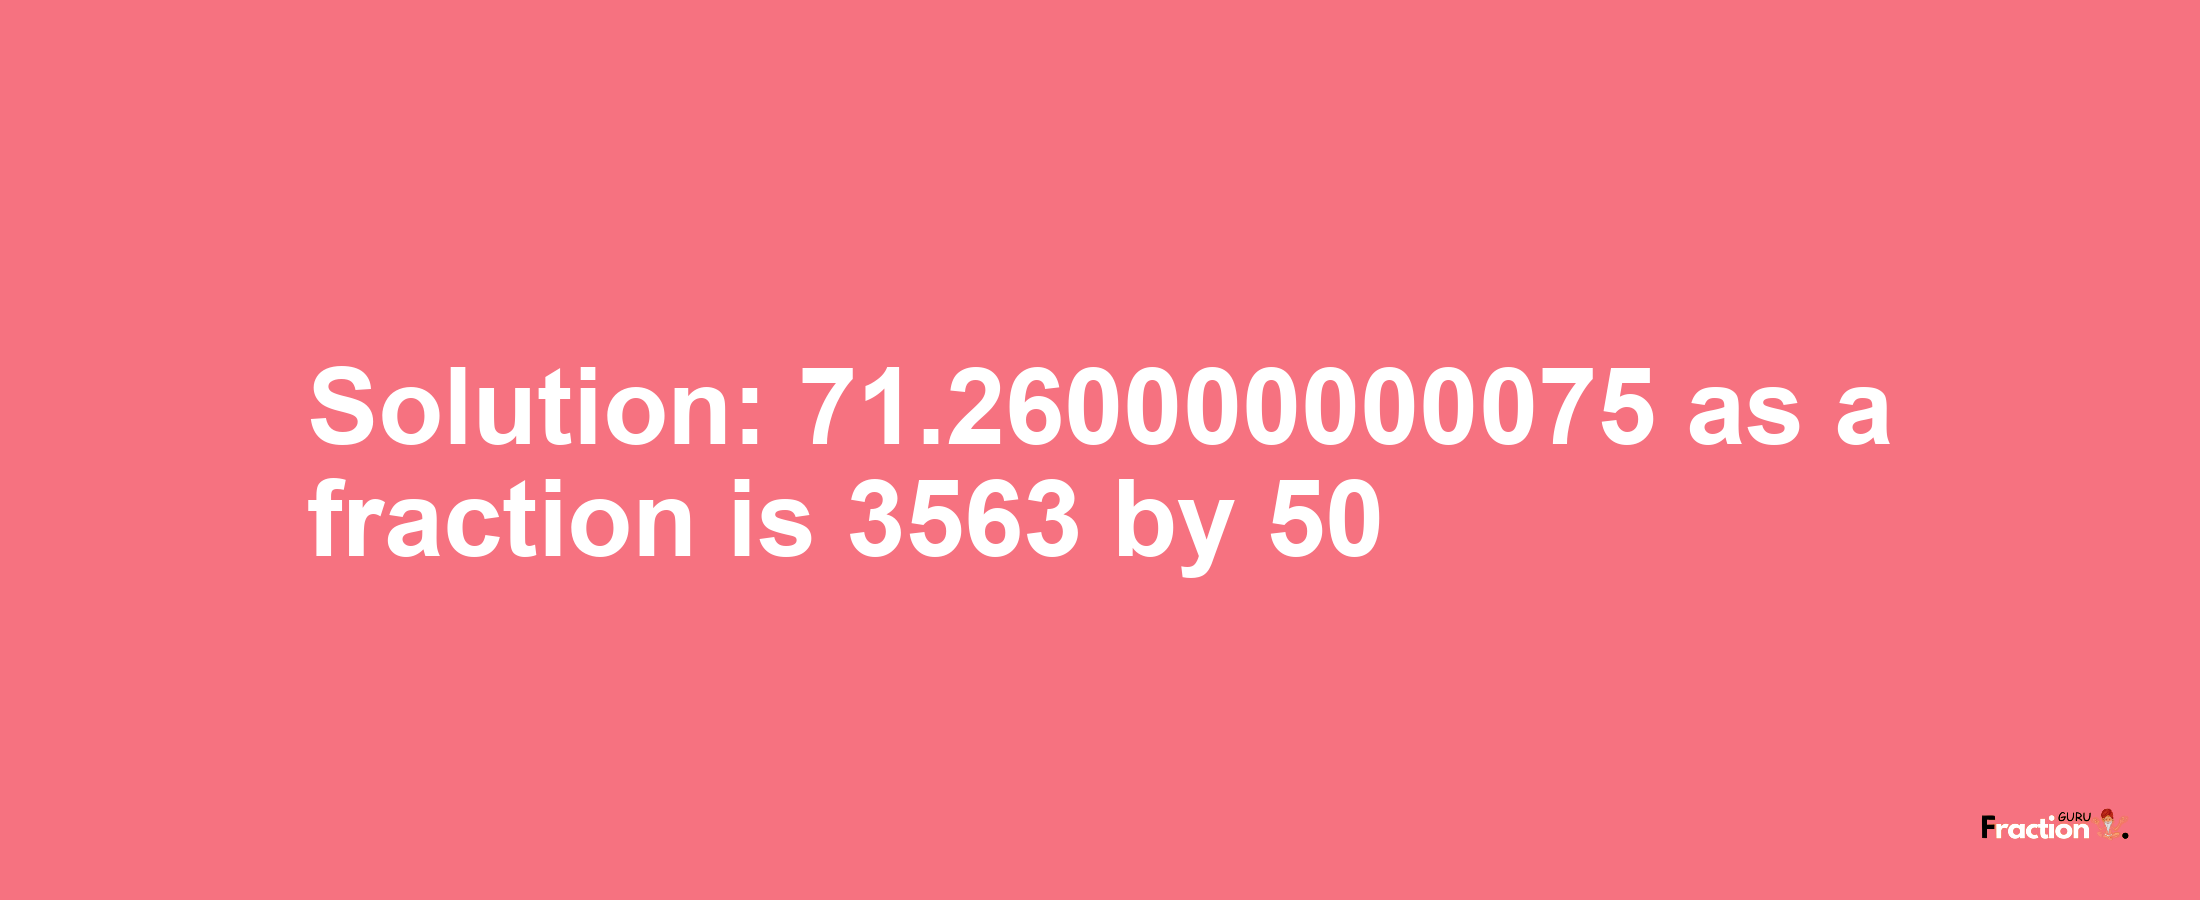 Solution:71.260000000075 as a fraction is 3563/50